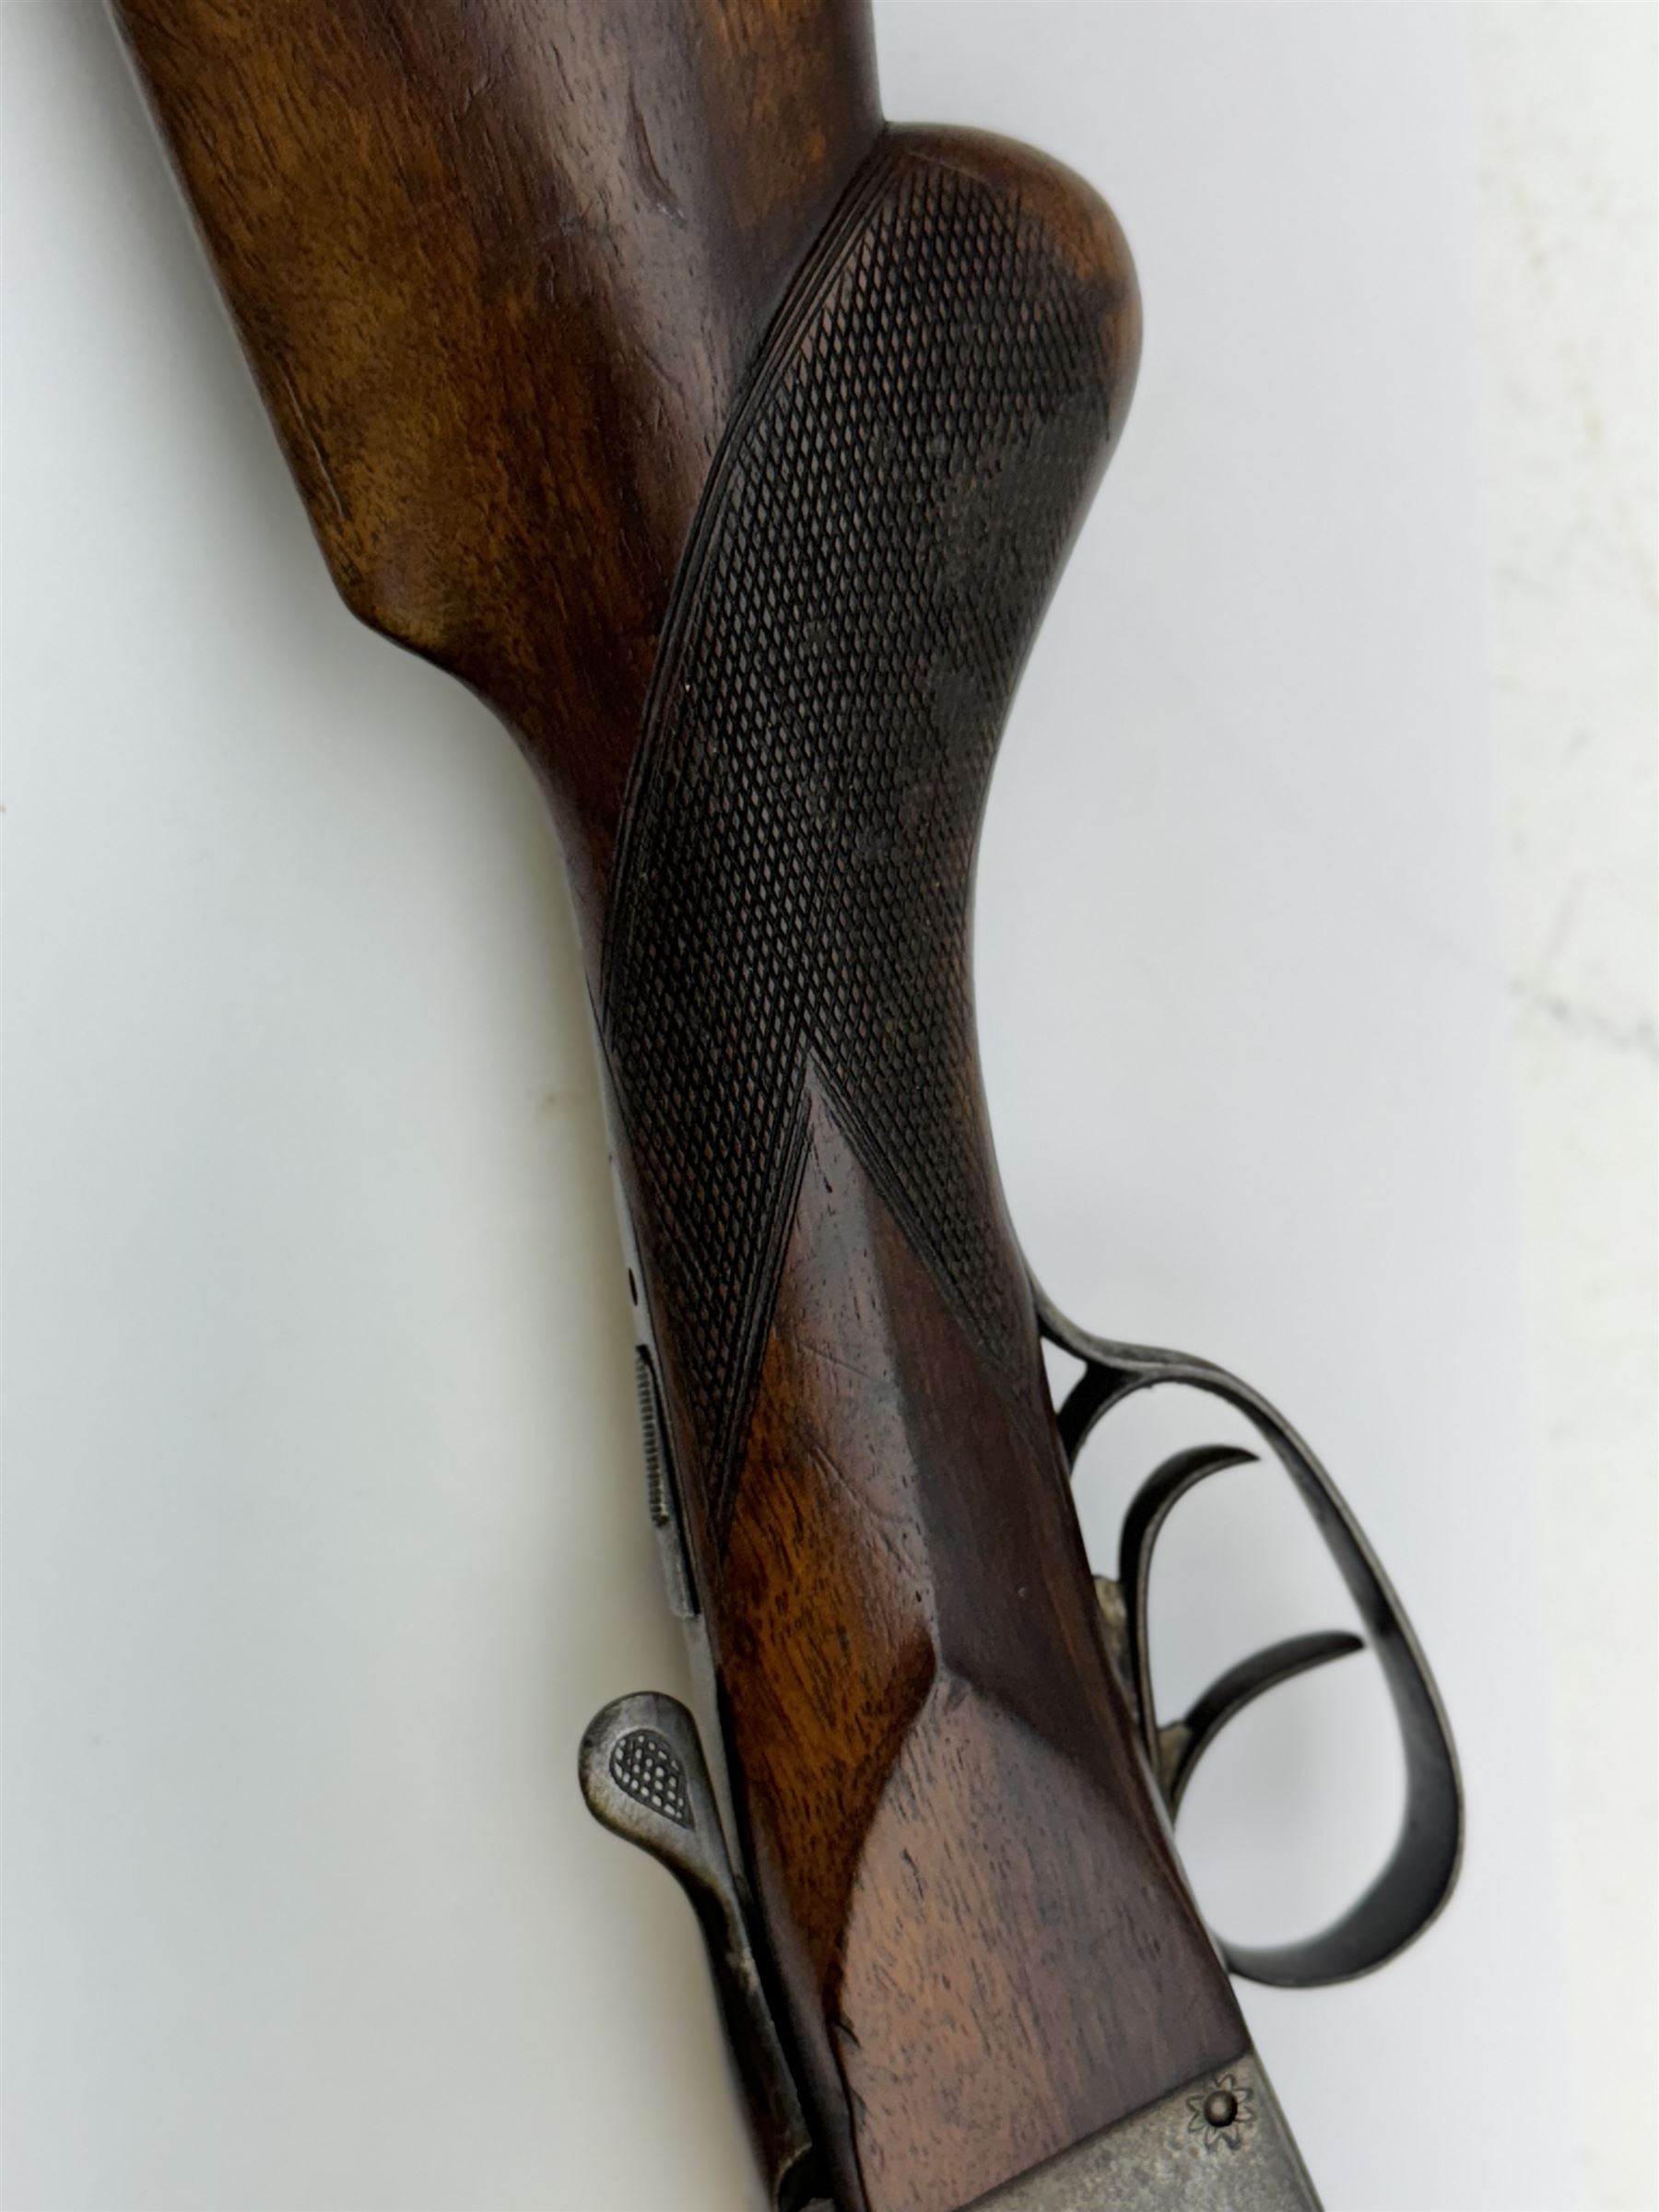 SHOTGUN CERTIFICATE REQUIRED - foreign 12-bore double trigger side by side double barrel shotgun ser - Image 16 of 16